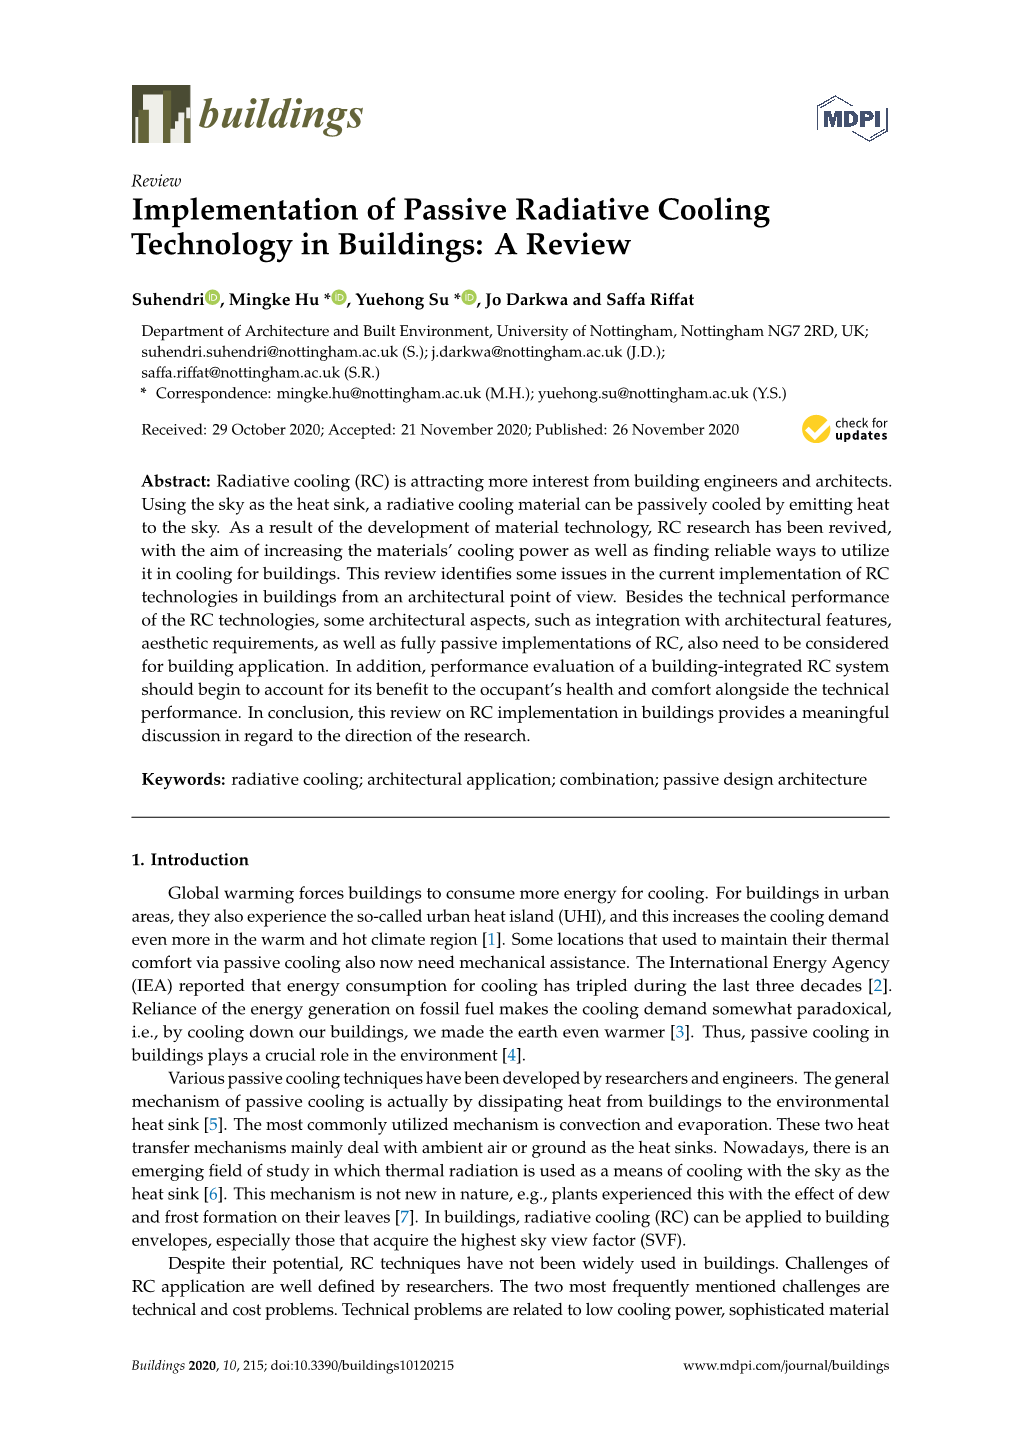 Implementation of Passive Radiative Cooling Technology in Buildings: a Review